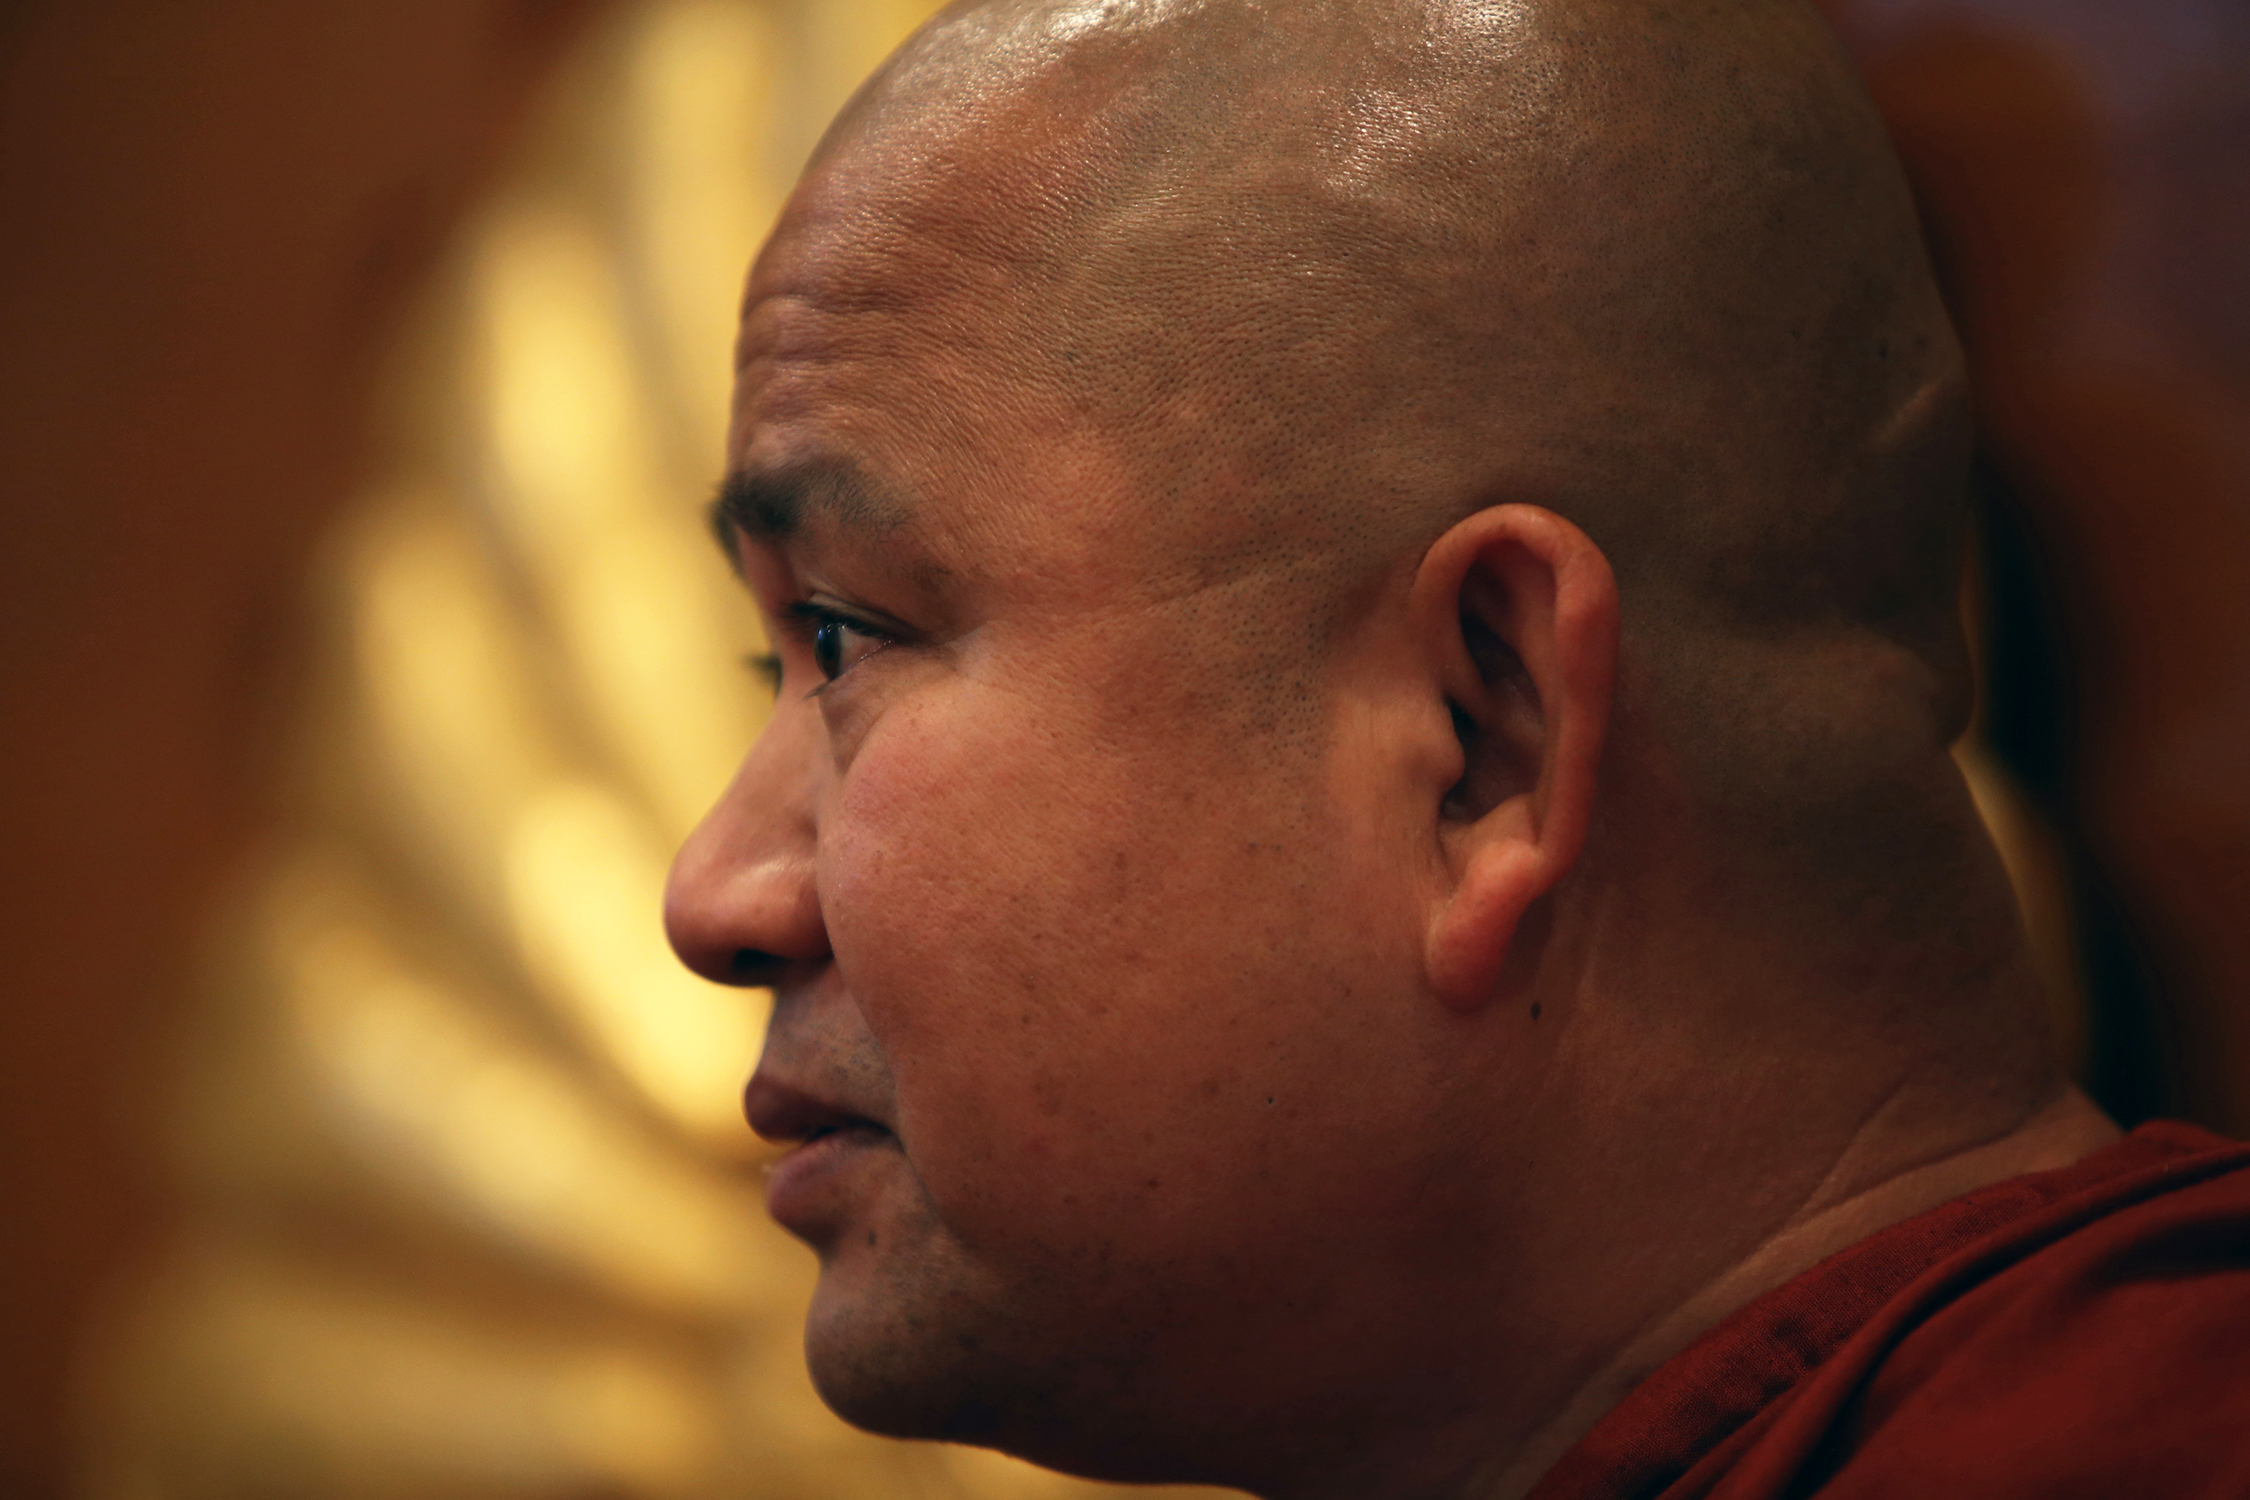  Ashin Gunissara, a Buddhist monk who founded Dhammajoti Meditation Center in Baldwin Park,&nbsp;with the help of donors was able to build a school in the village of his birth place at the Ma Soe Yein Monastery where he grew up as a young boy.&nbsp;©